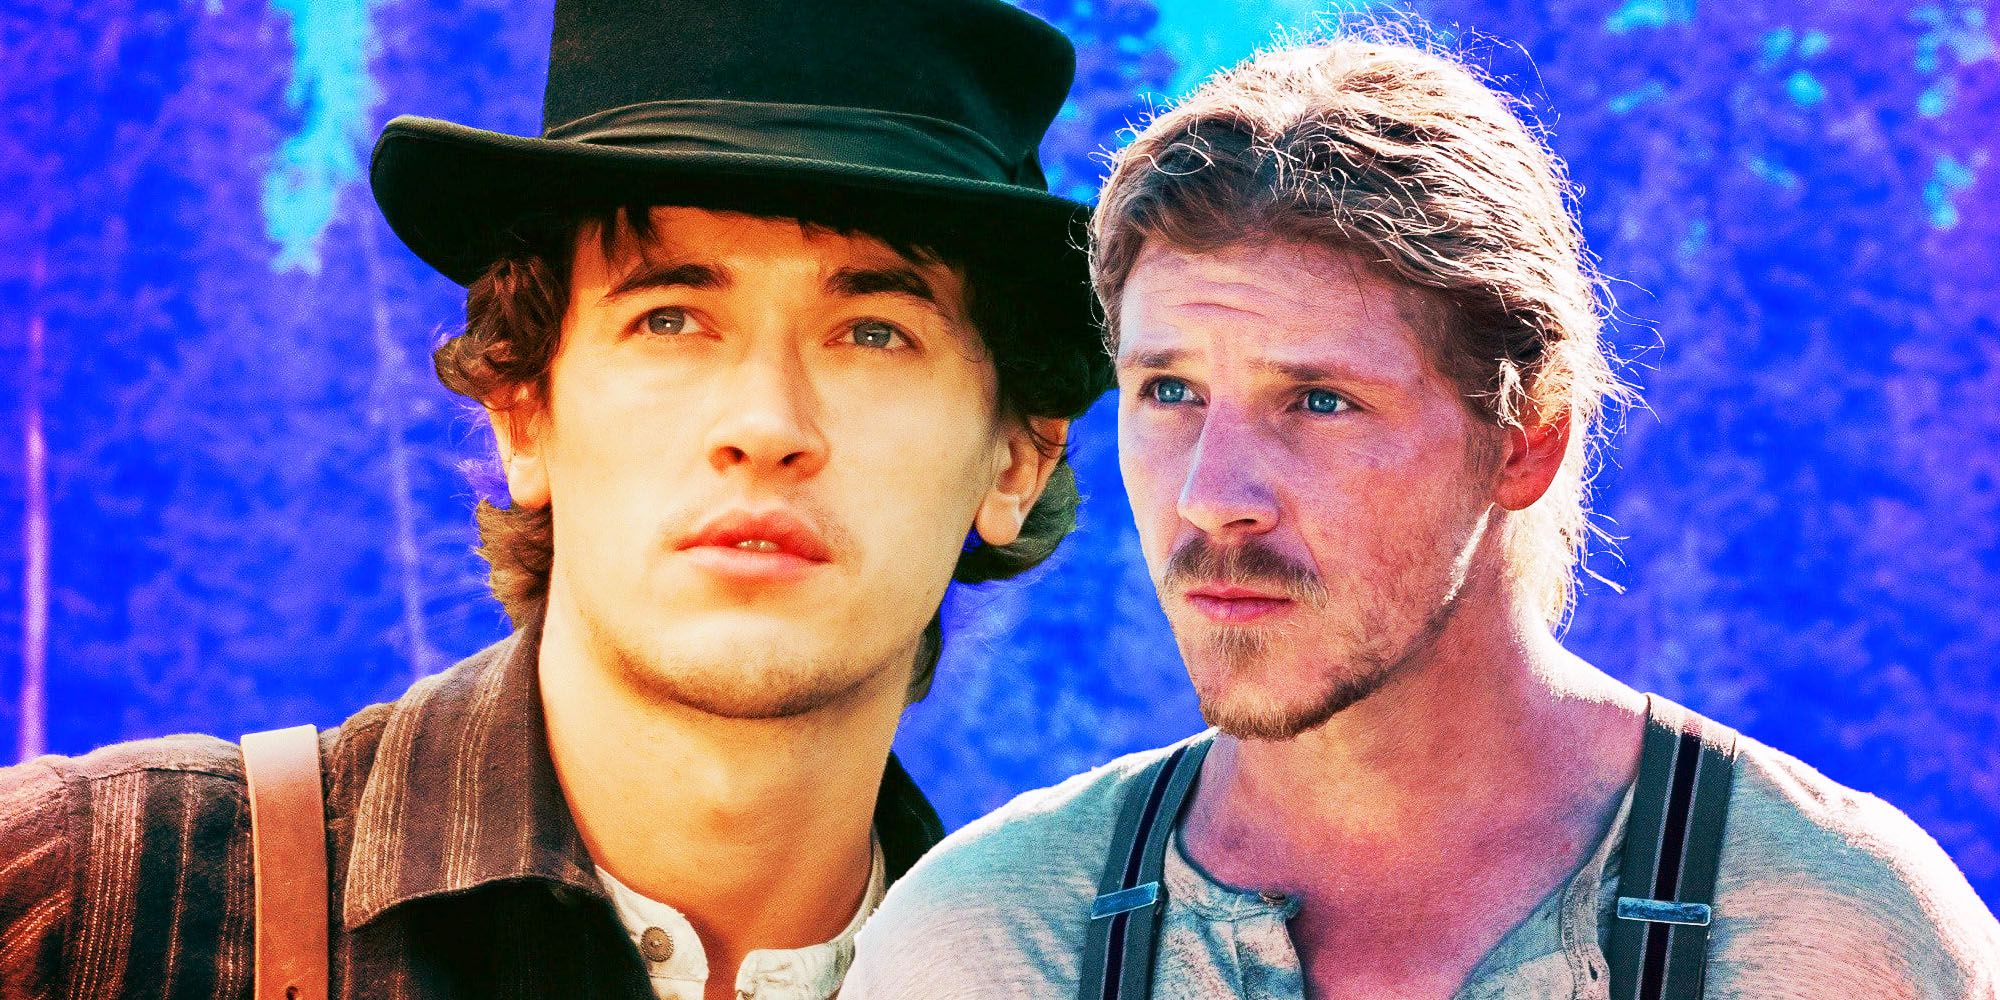 A composite image of Billy and Jesse Evans from Billy the Kid